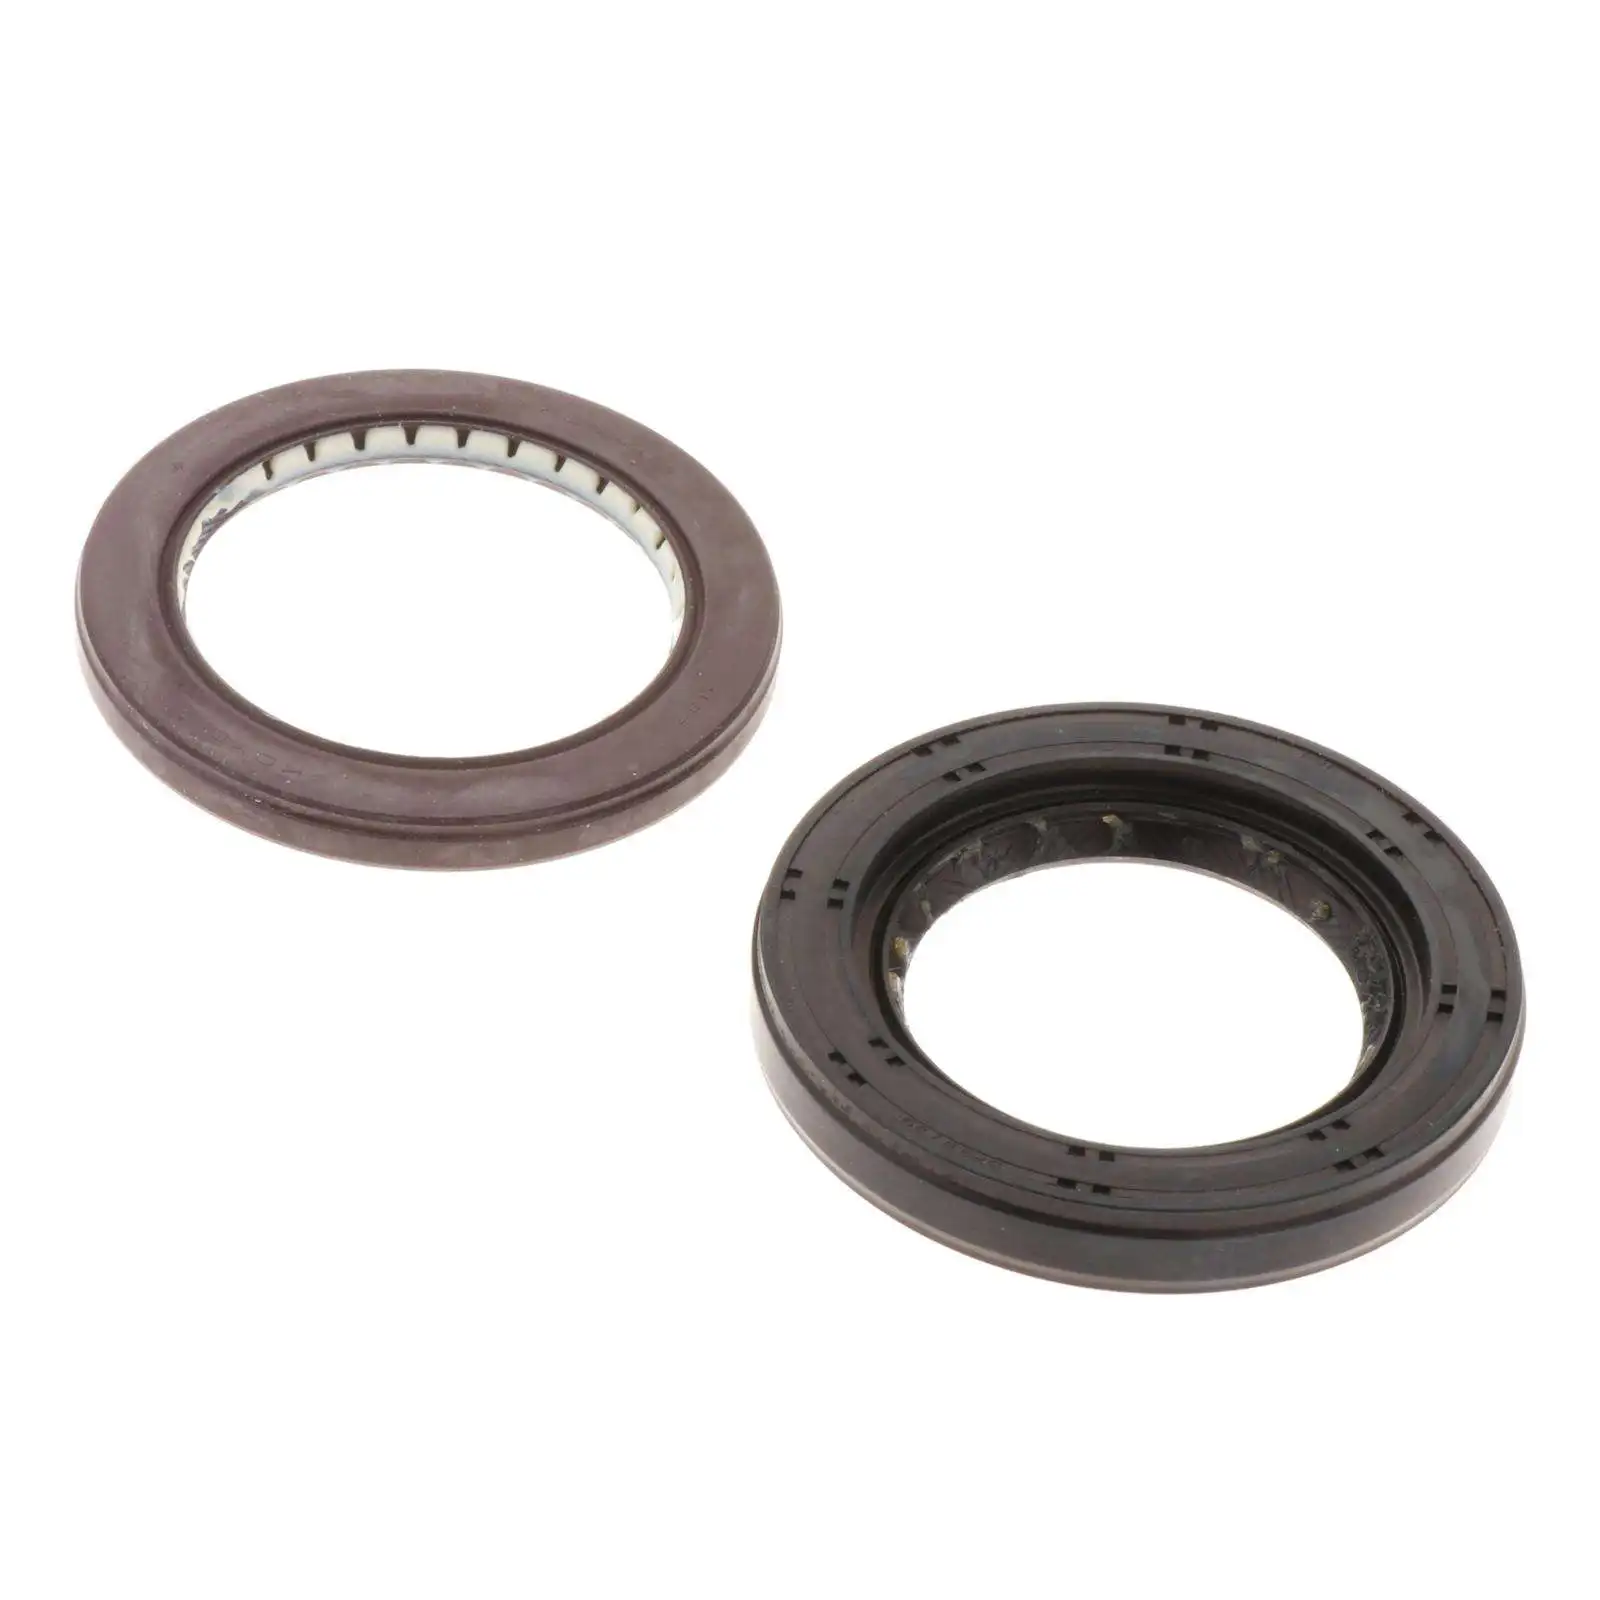 Oil Seal Durable Fit for 09G Transmission High Performance Direct Replaces Accessories